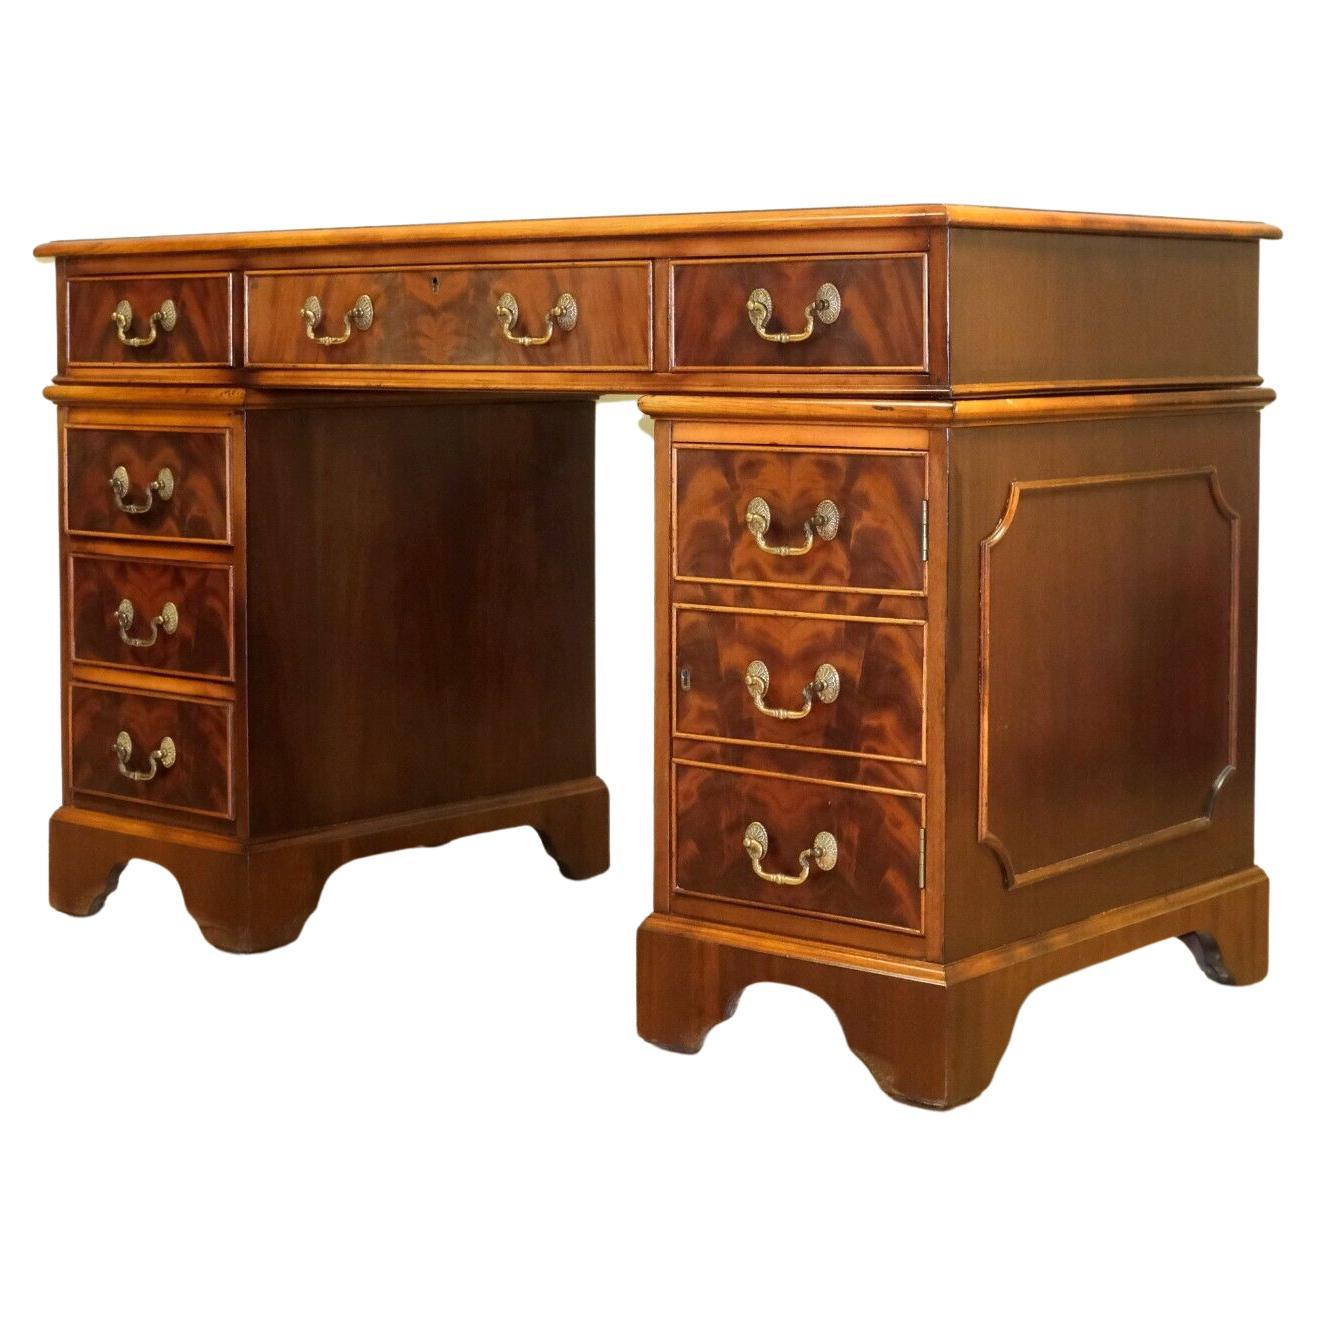 LATE 20TH C WARING & GILLOW PEDESTAL DESK WiTH GOLD TOOLED RED LEATHER TOP  For Sale